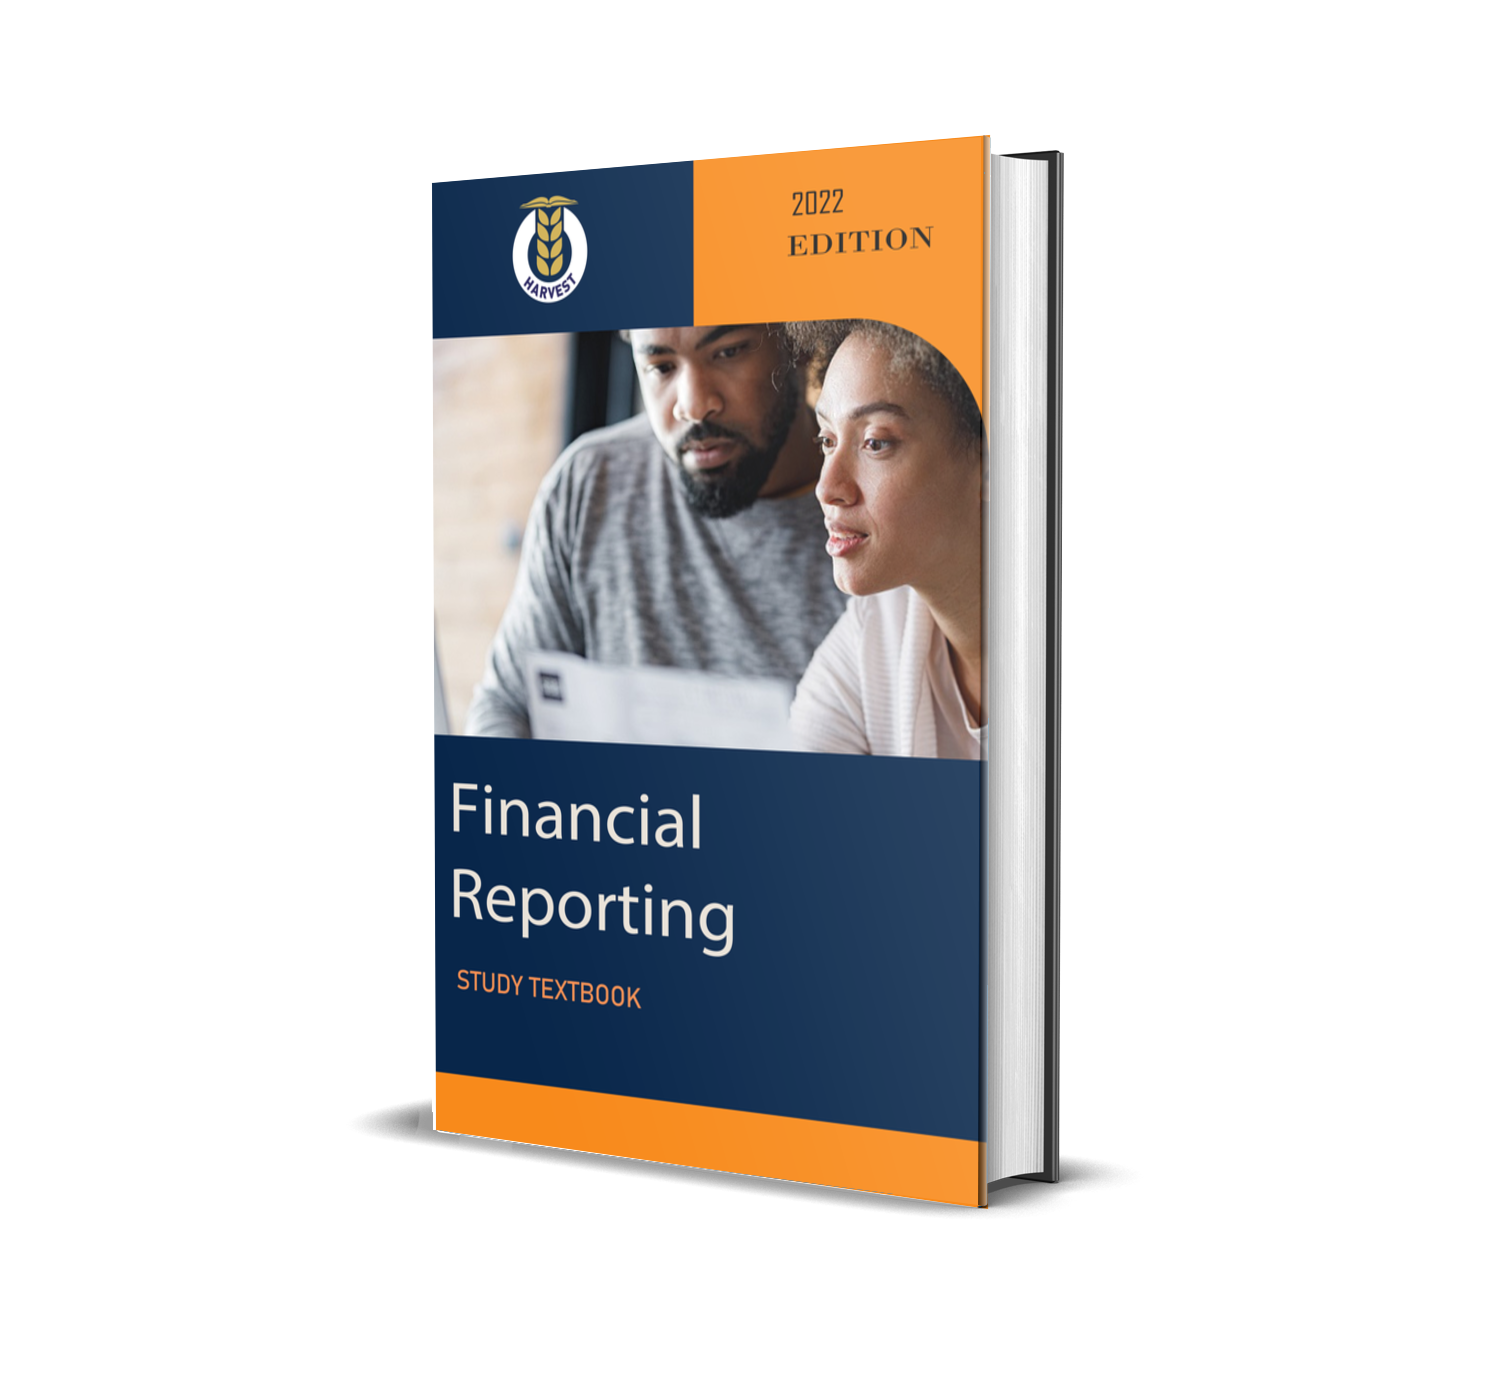 Financial Reporting Study Textbook